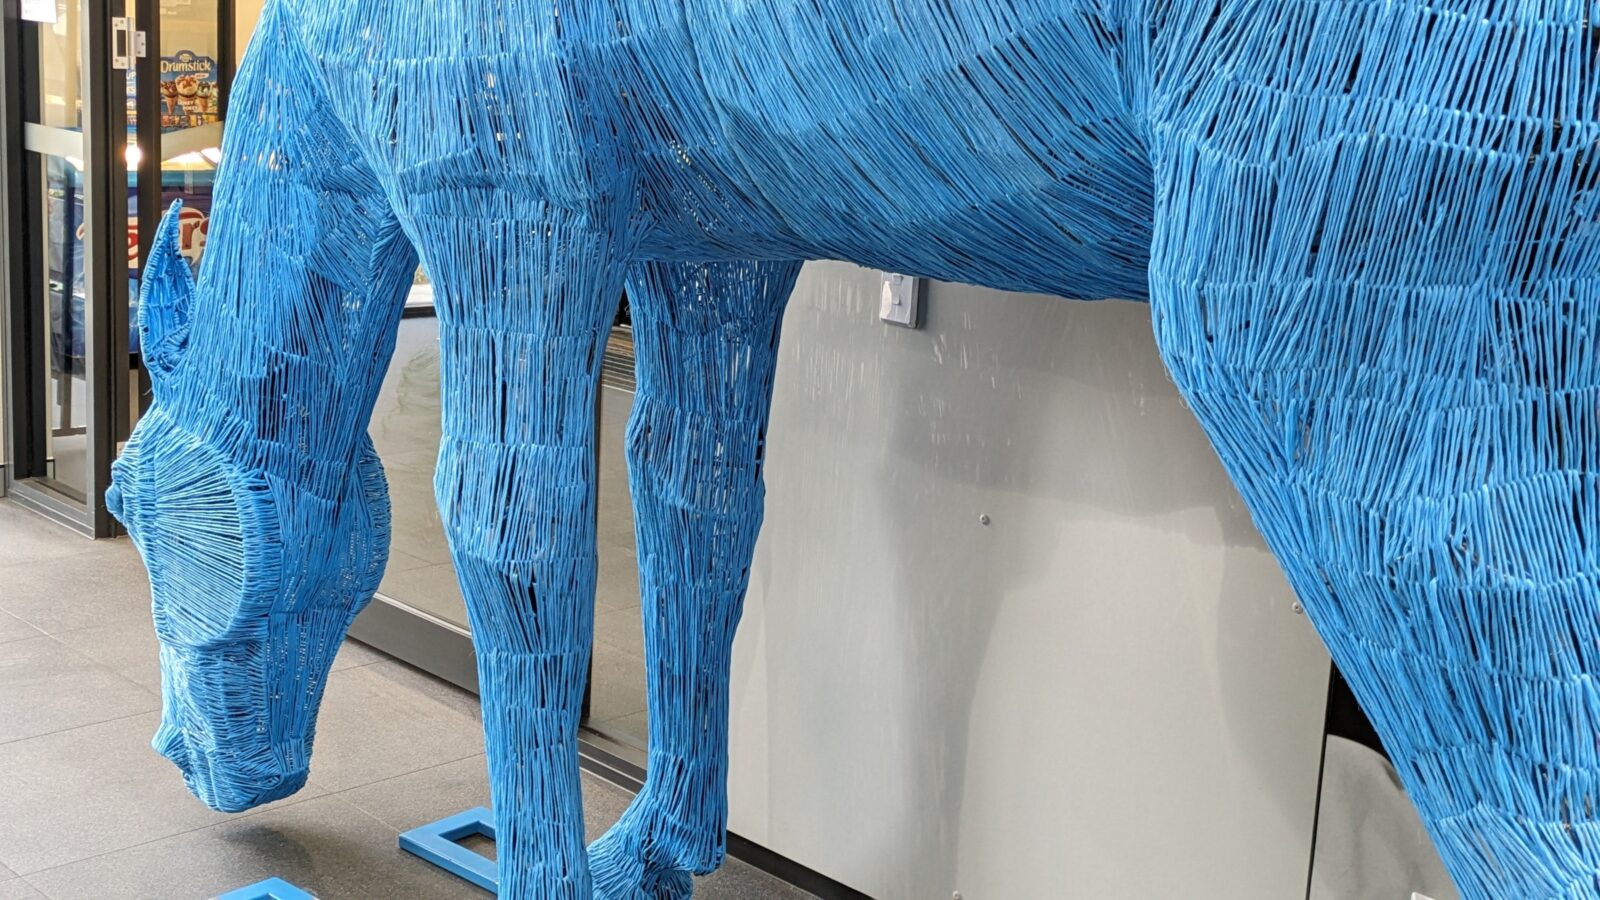 Big Blue horse sculpture made of baling twine